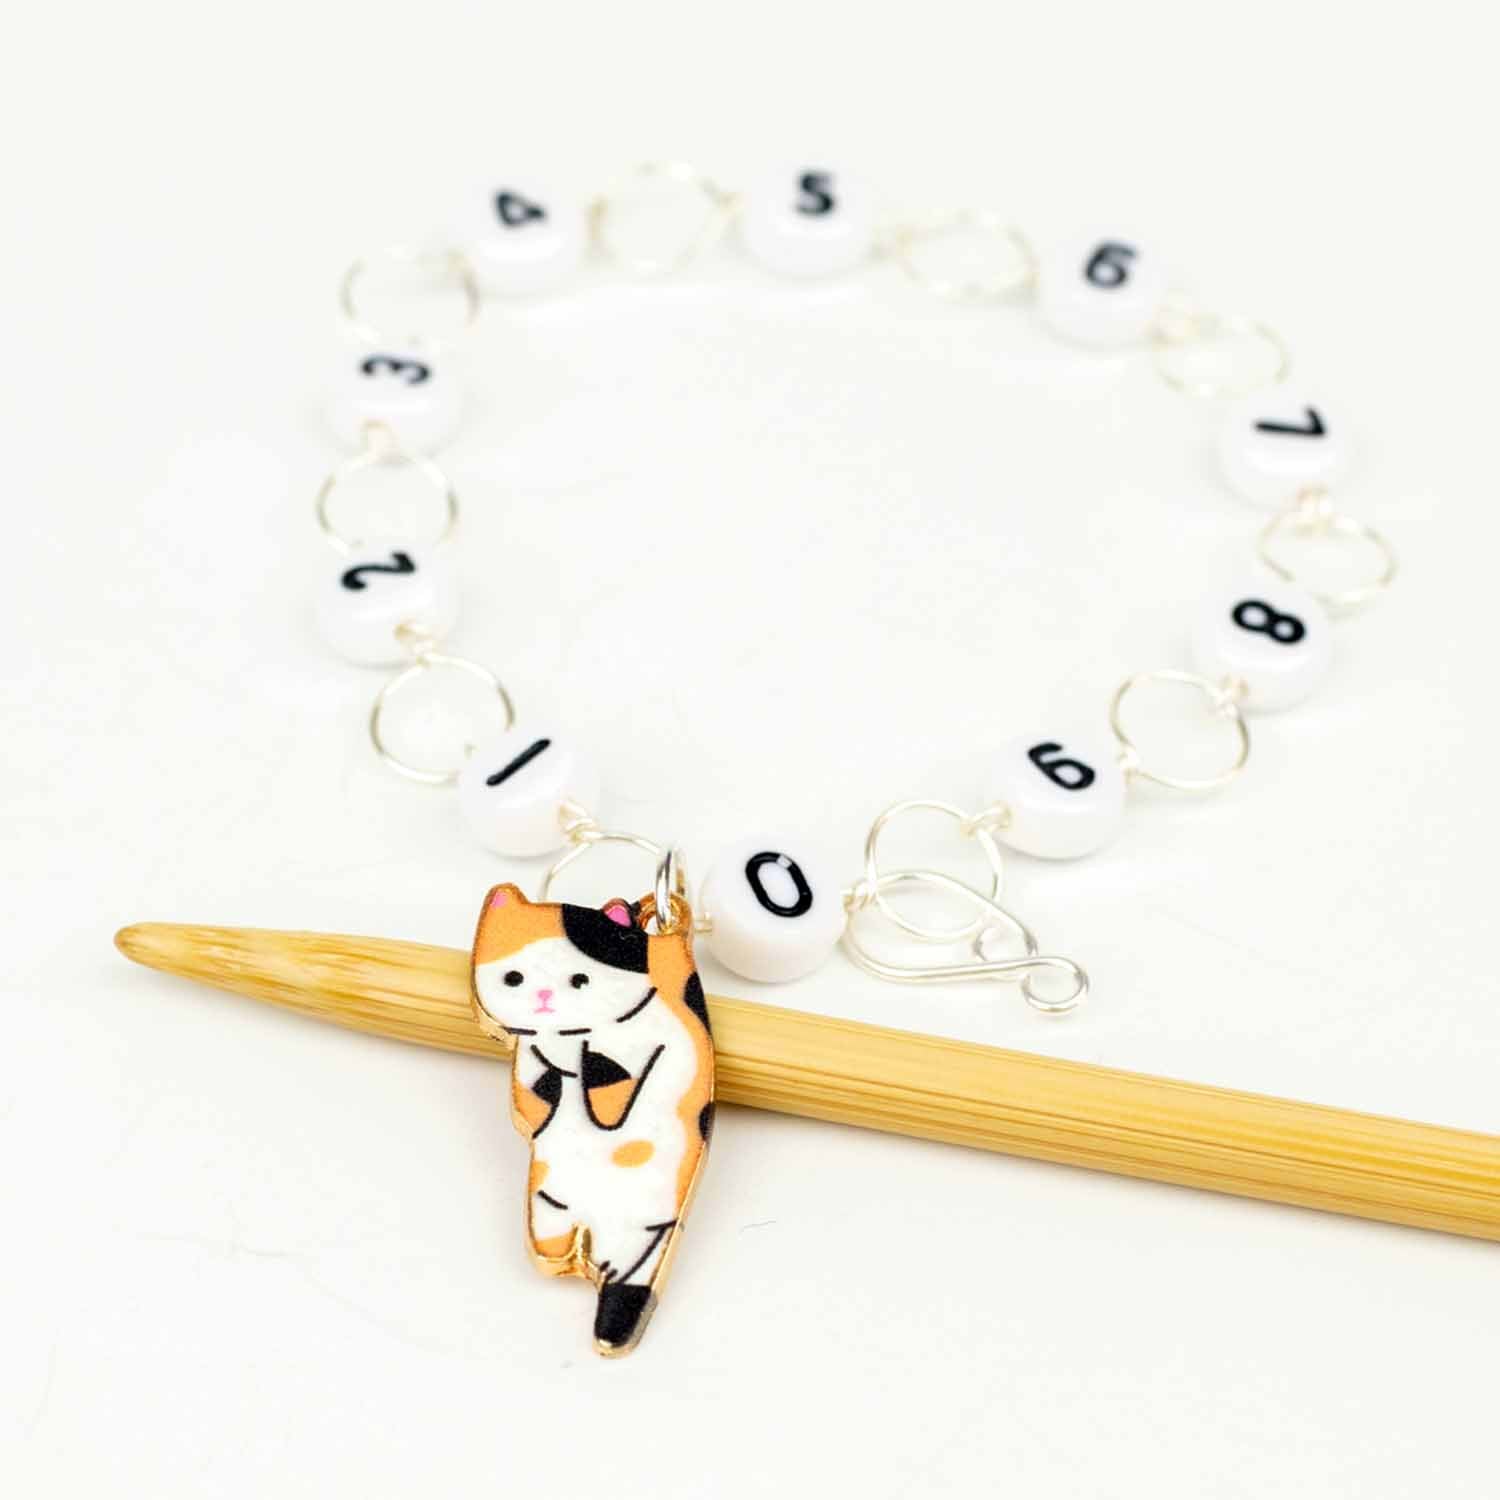 Calico Cat Knitting Chain Row Counter